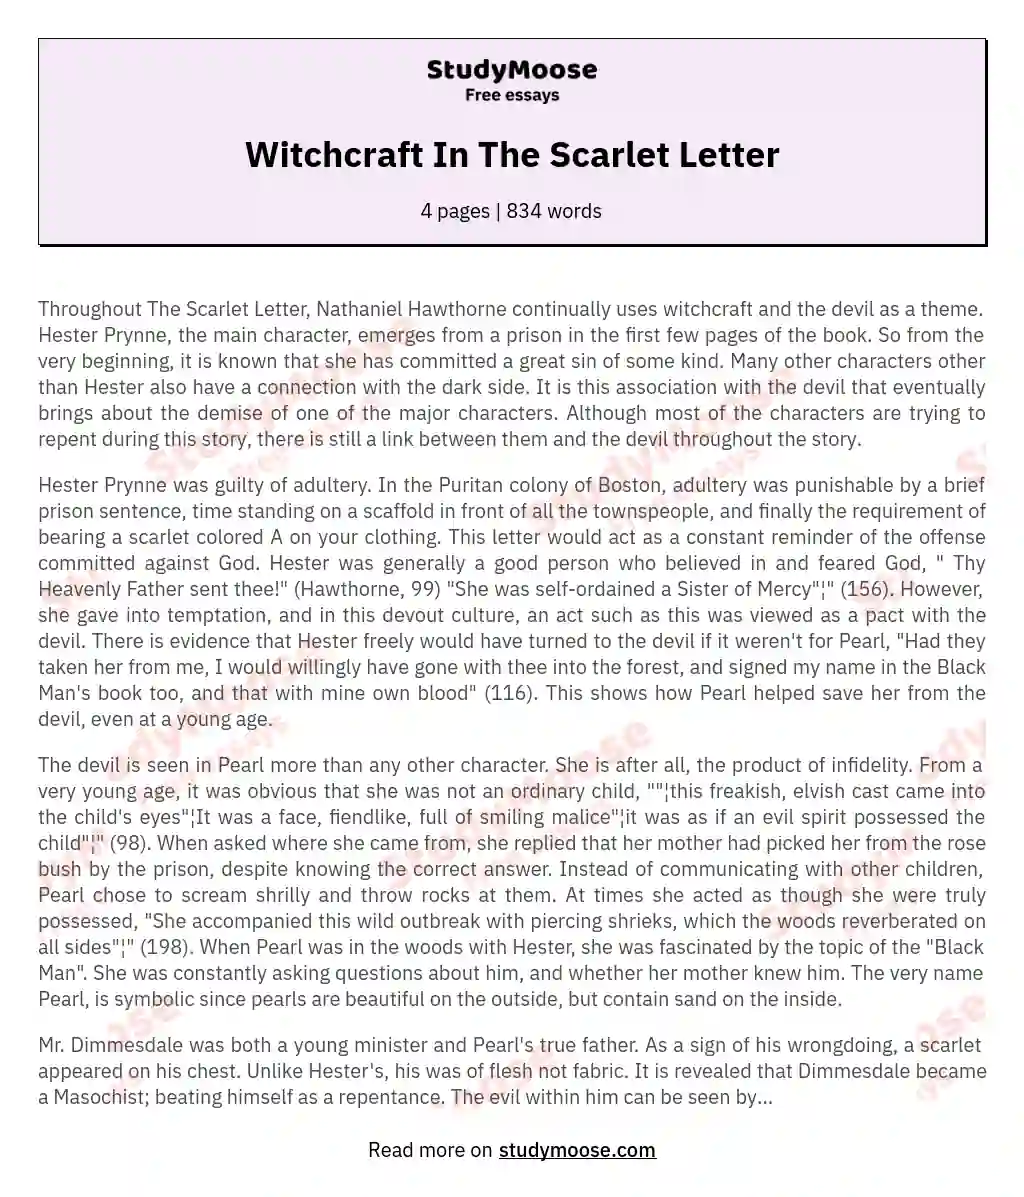 Witchcraft In The Scarlet Letter